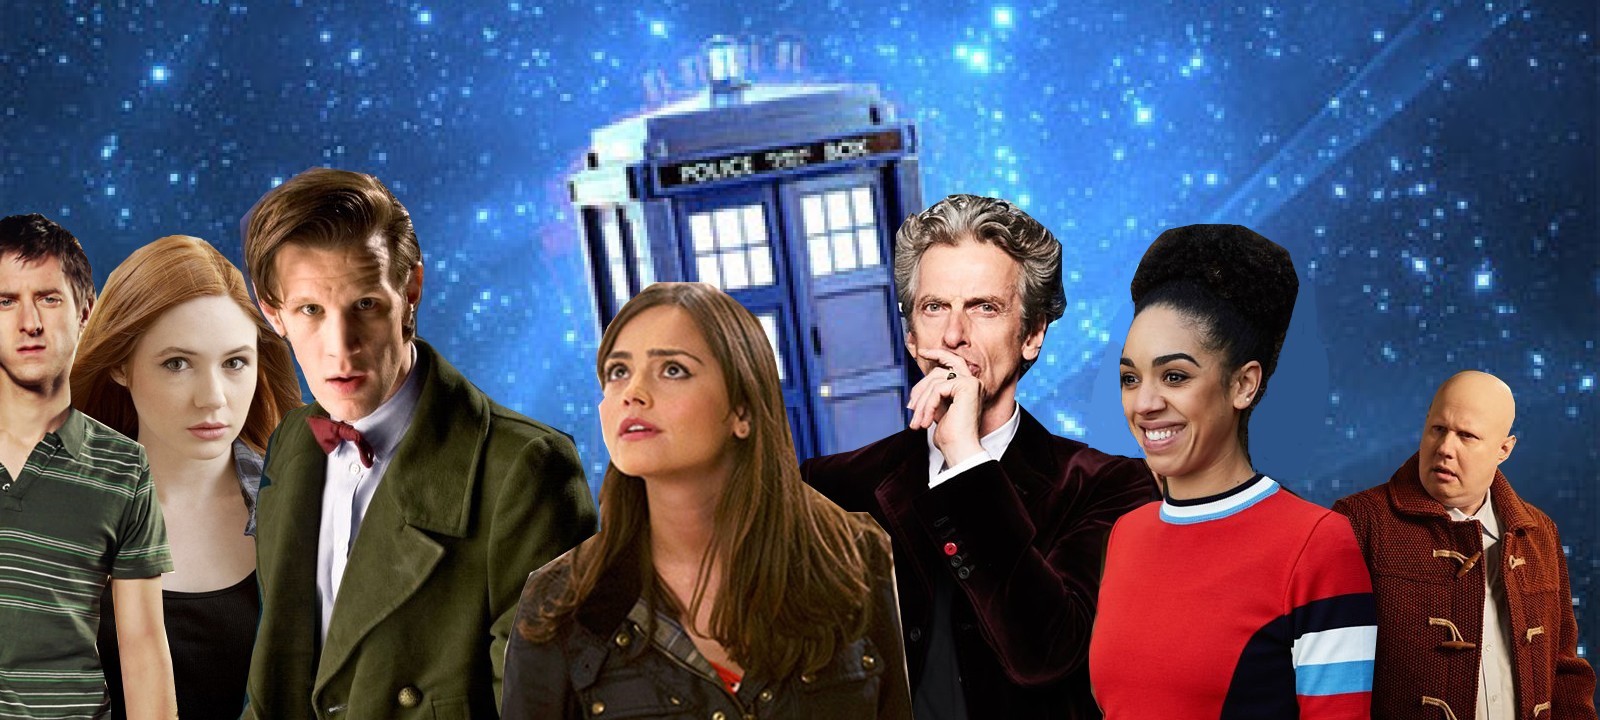 Doctor who: wallpaper